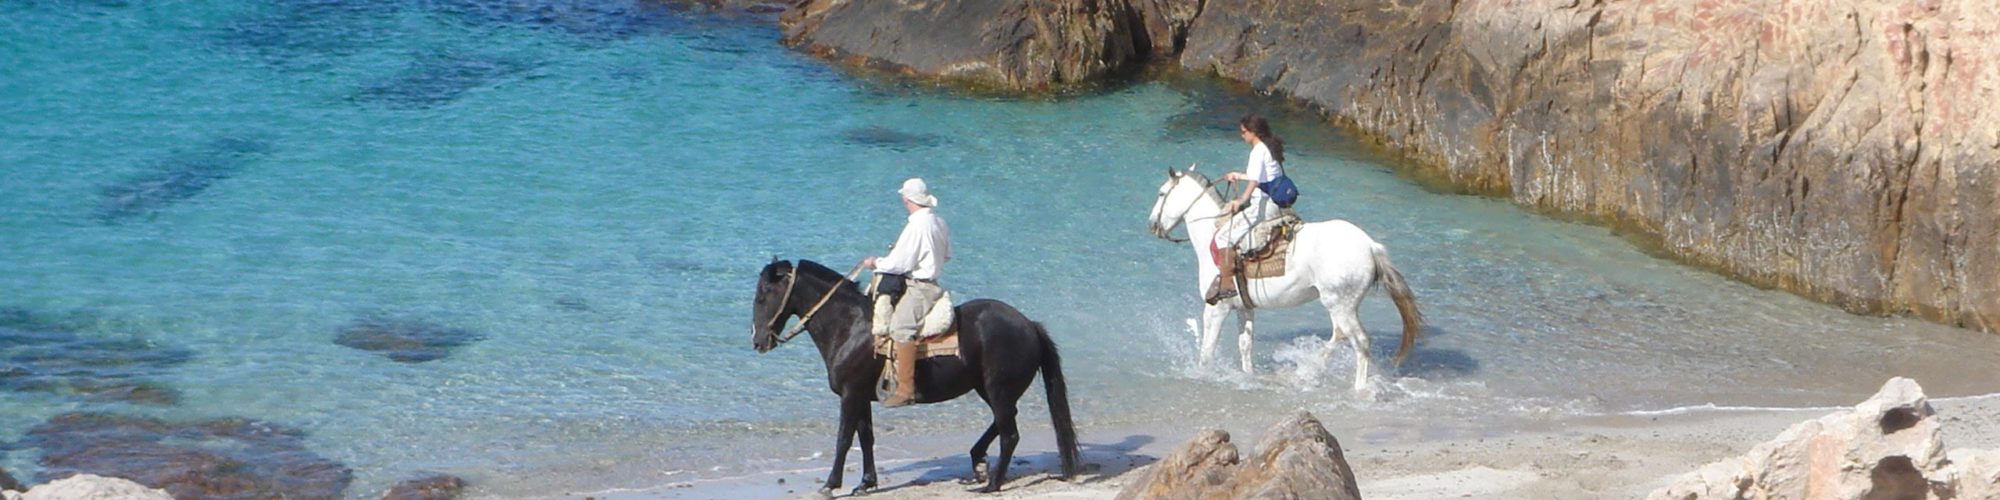 Bahia Bustamante travel agents packages deals